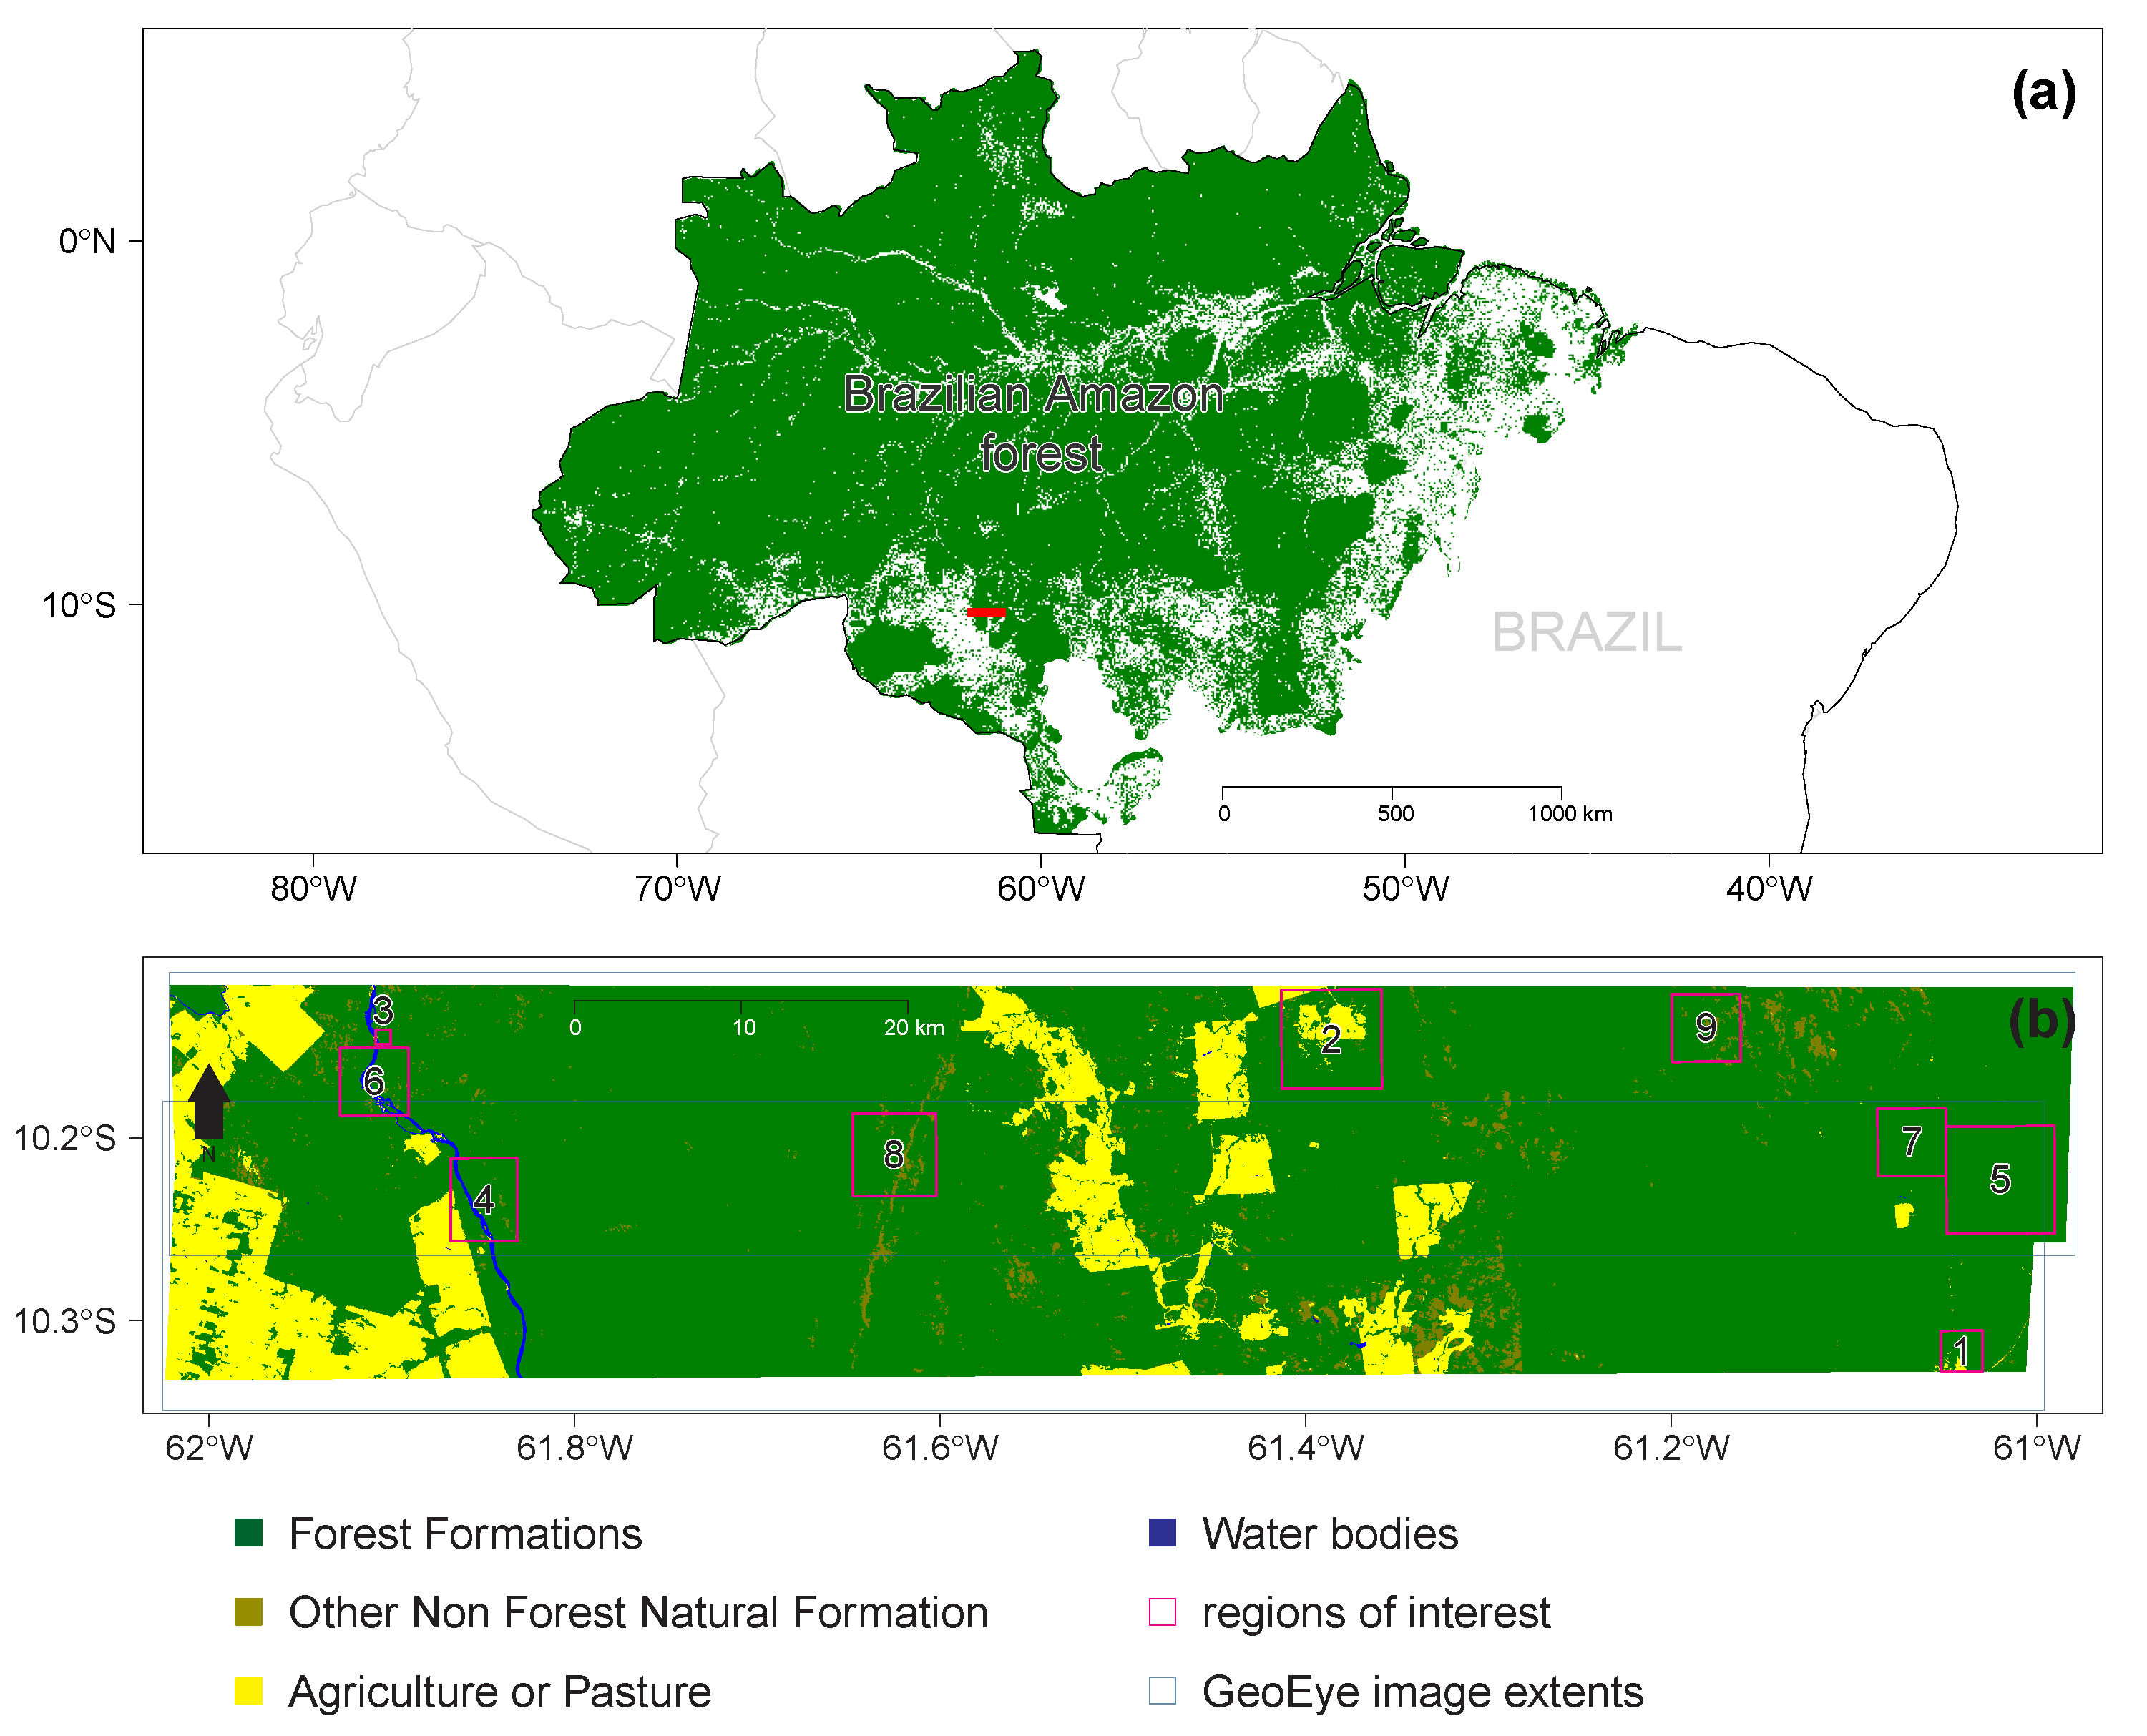 Remote Sensing | Free Full-Text | Regional Mapping and Spatial Distribution  Analysis of Canopy Palms in an Amazon Forest Using Deep Learning and VHR  Images | HTML